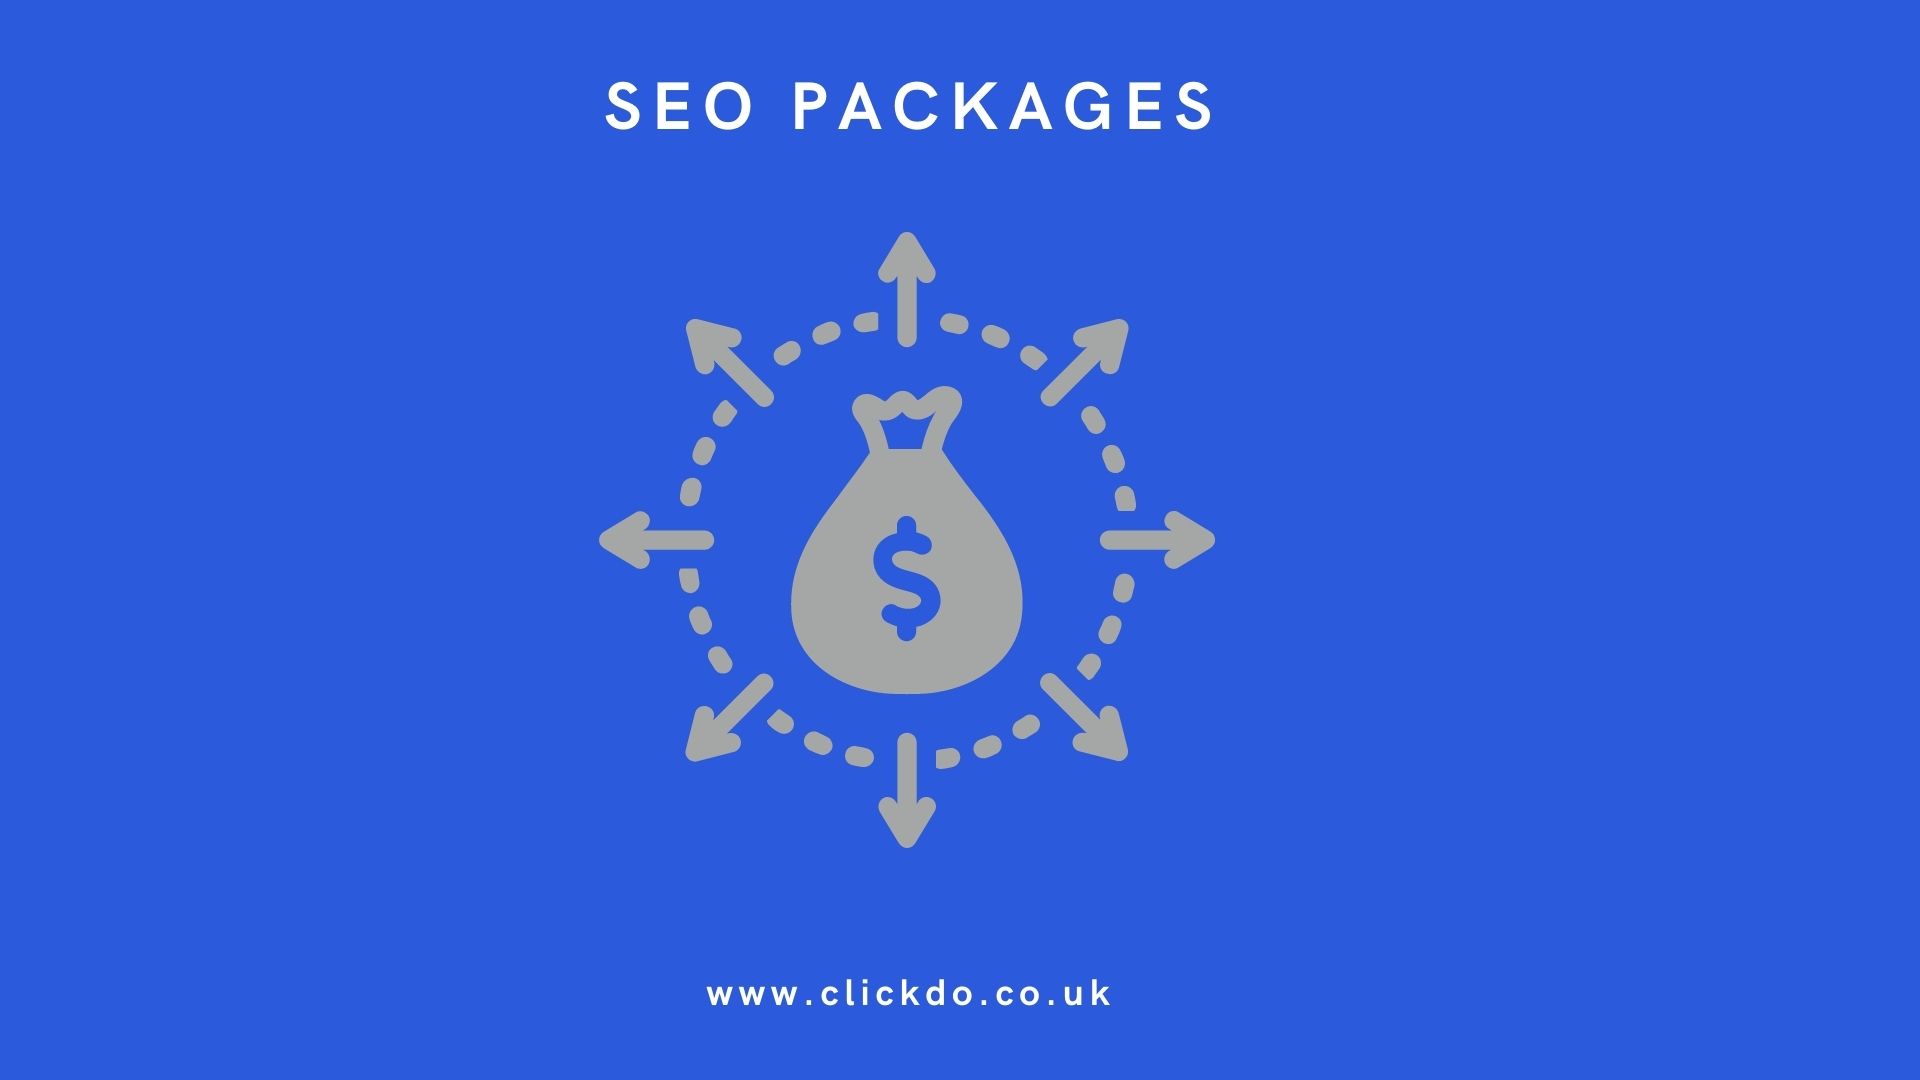 _SEO packages